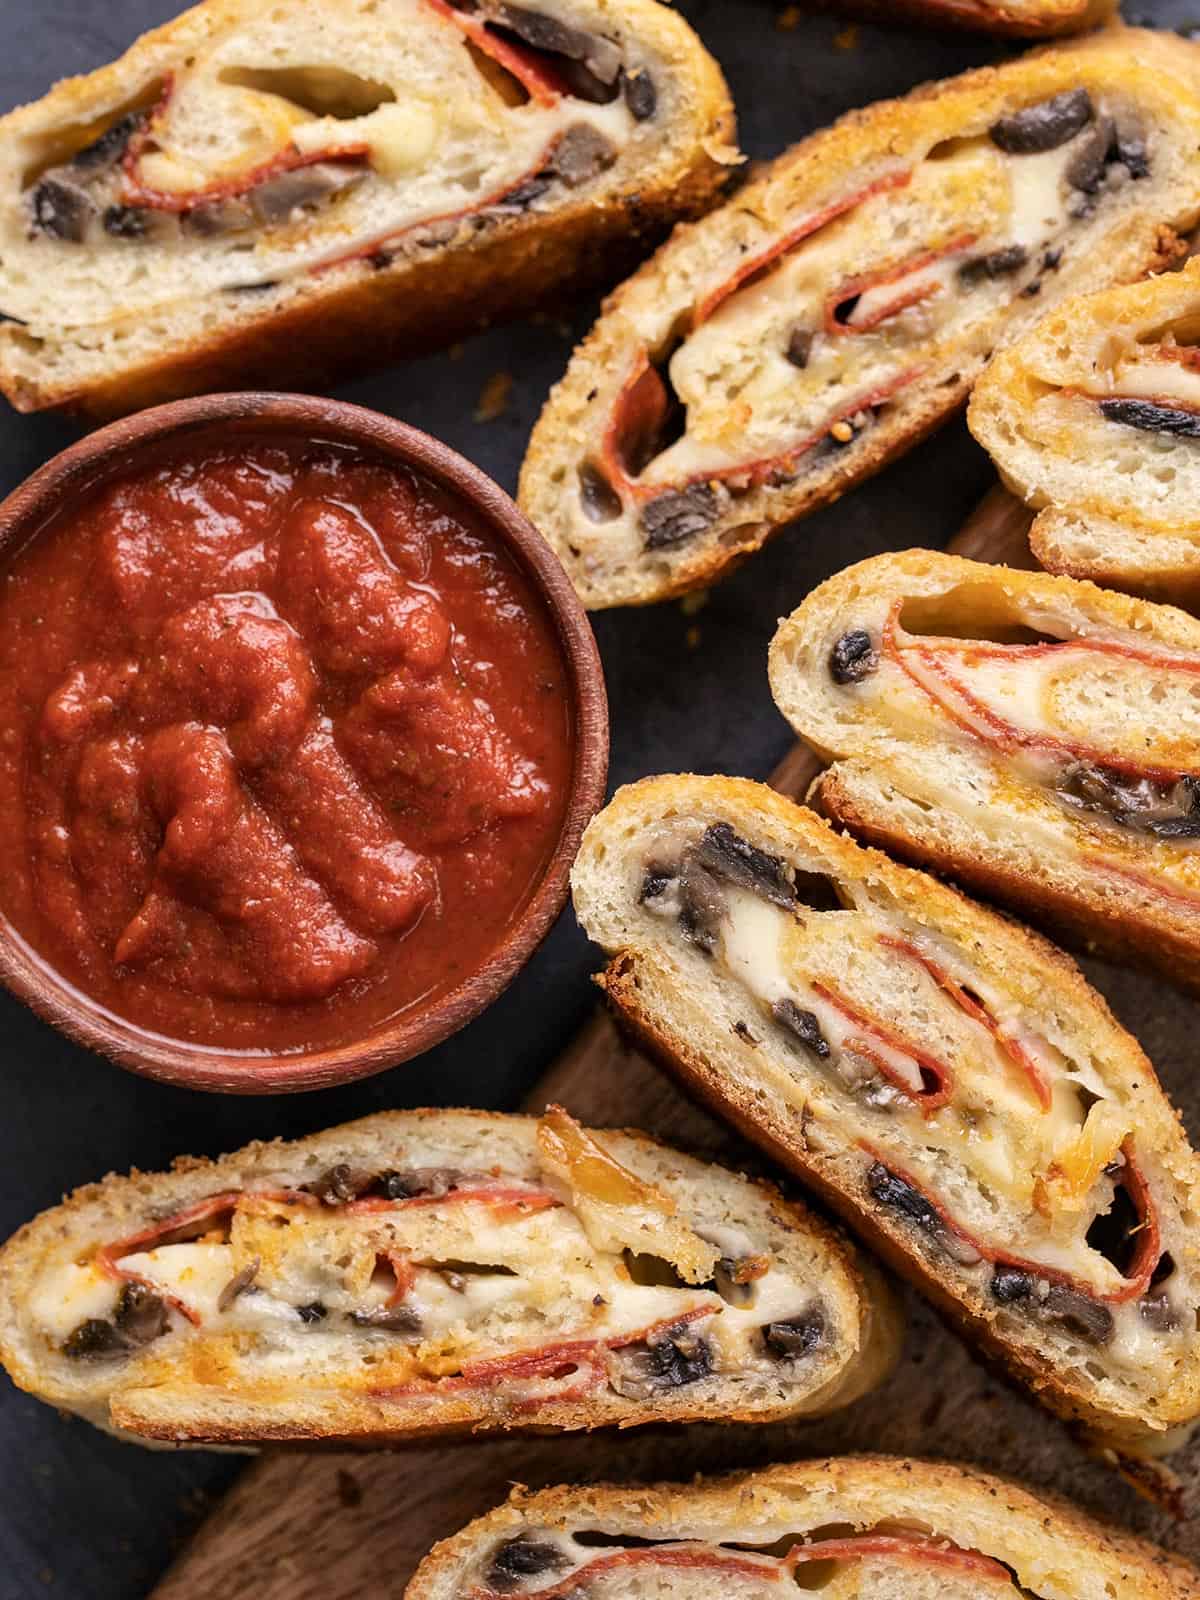 Overhead view of slices of stromboli next to a bowl of pizza sauce.